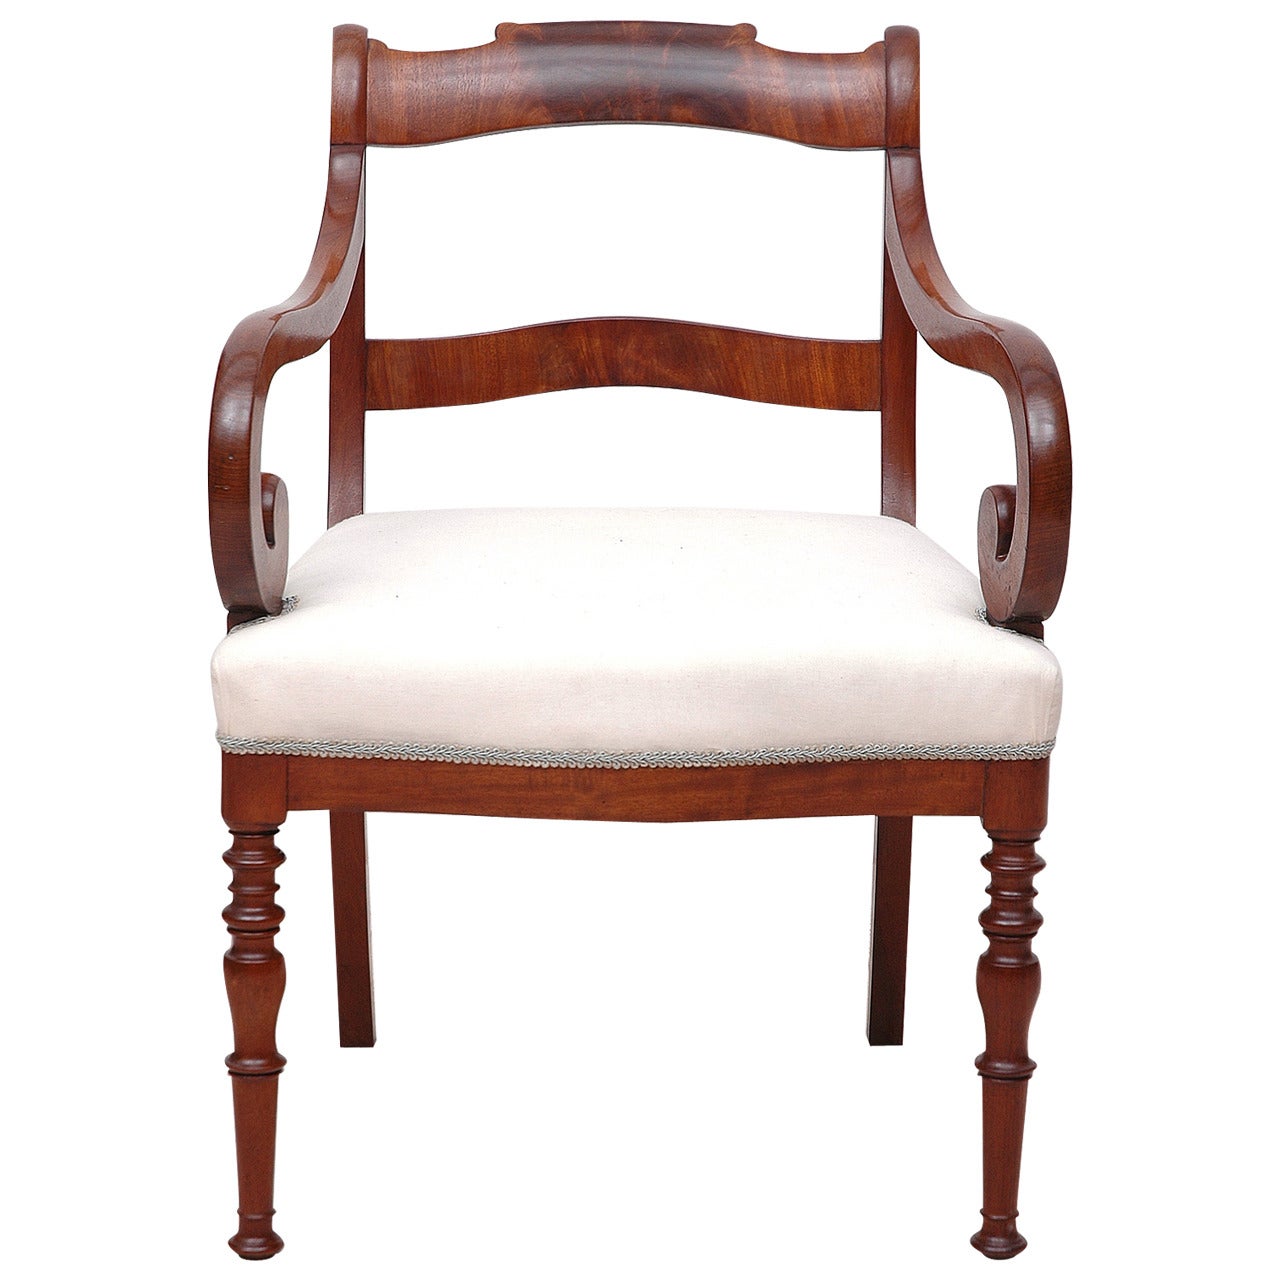 Fine Mahogany Single Armchair or Fauteuil, Northern Europe, circa 1830